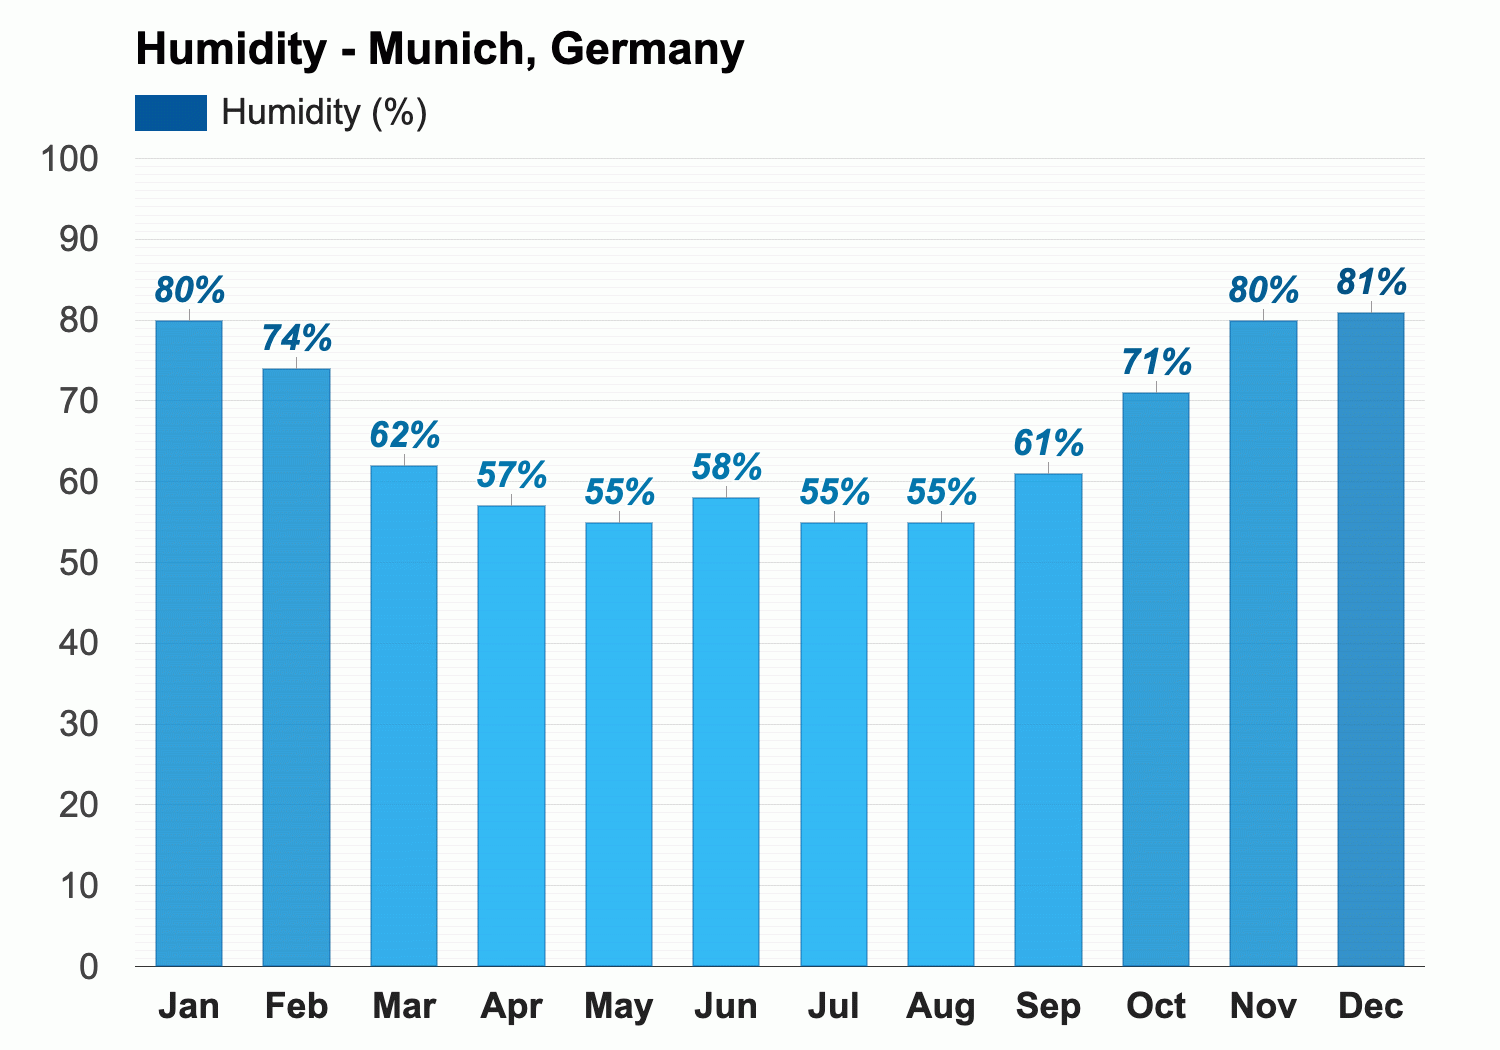 Munich, Germany - June weather forecast and climate information | Weather  Atlas